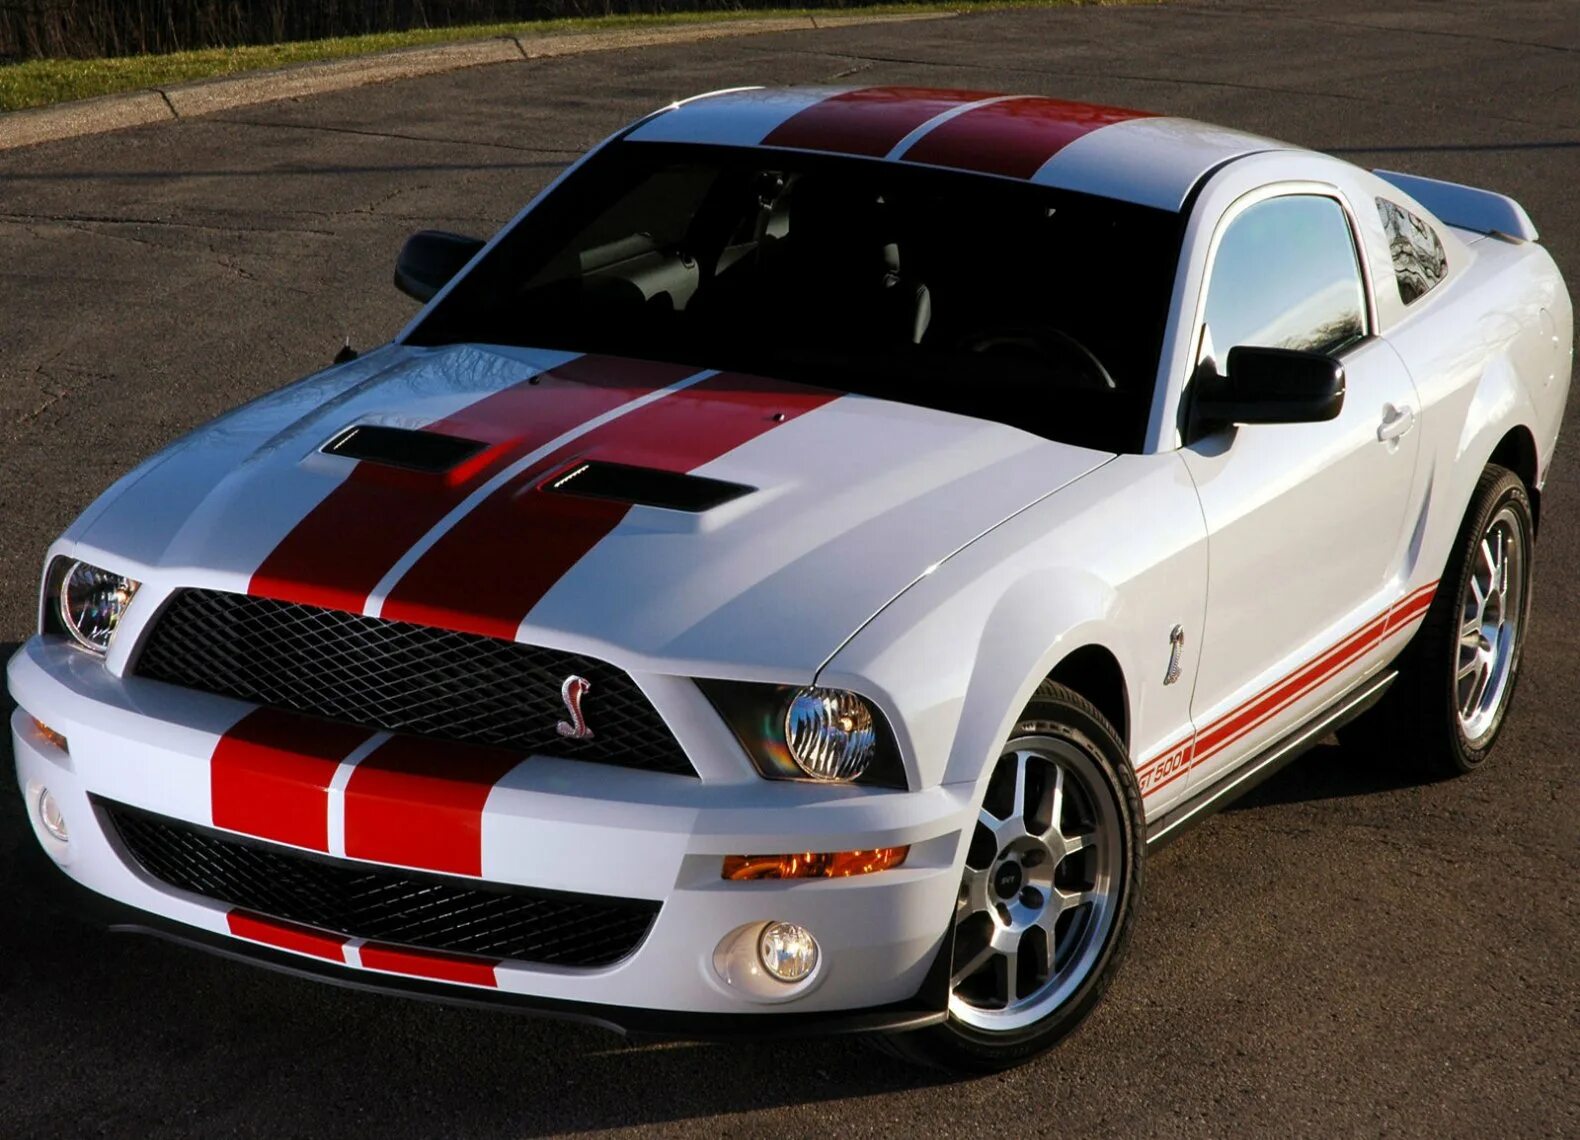 Mustang shelby gt. Форд Мустанг gt 500 Shelby. Ford Shelby gt500. Mustang Shelby gt500. Ford Mustang gt500.